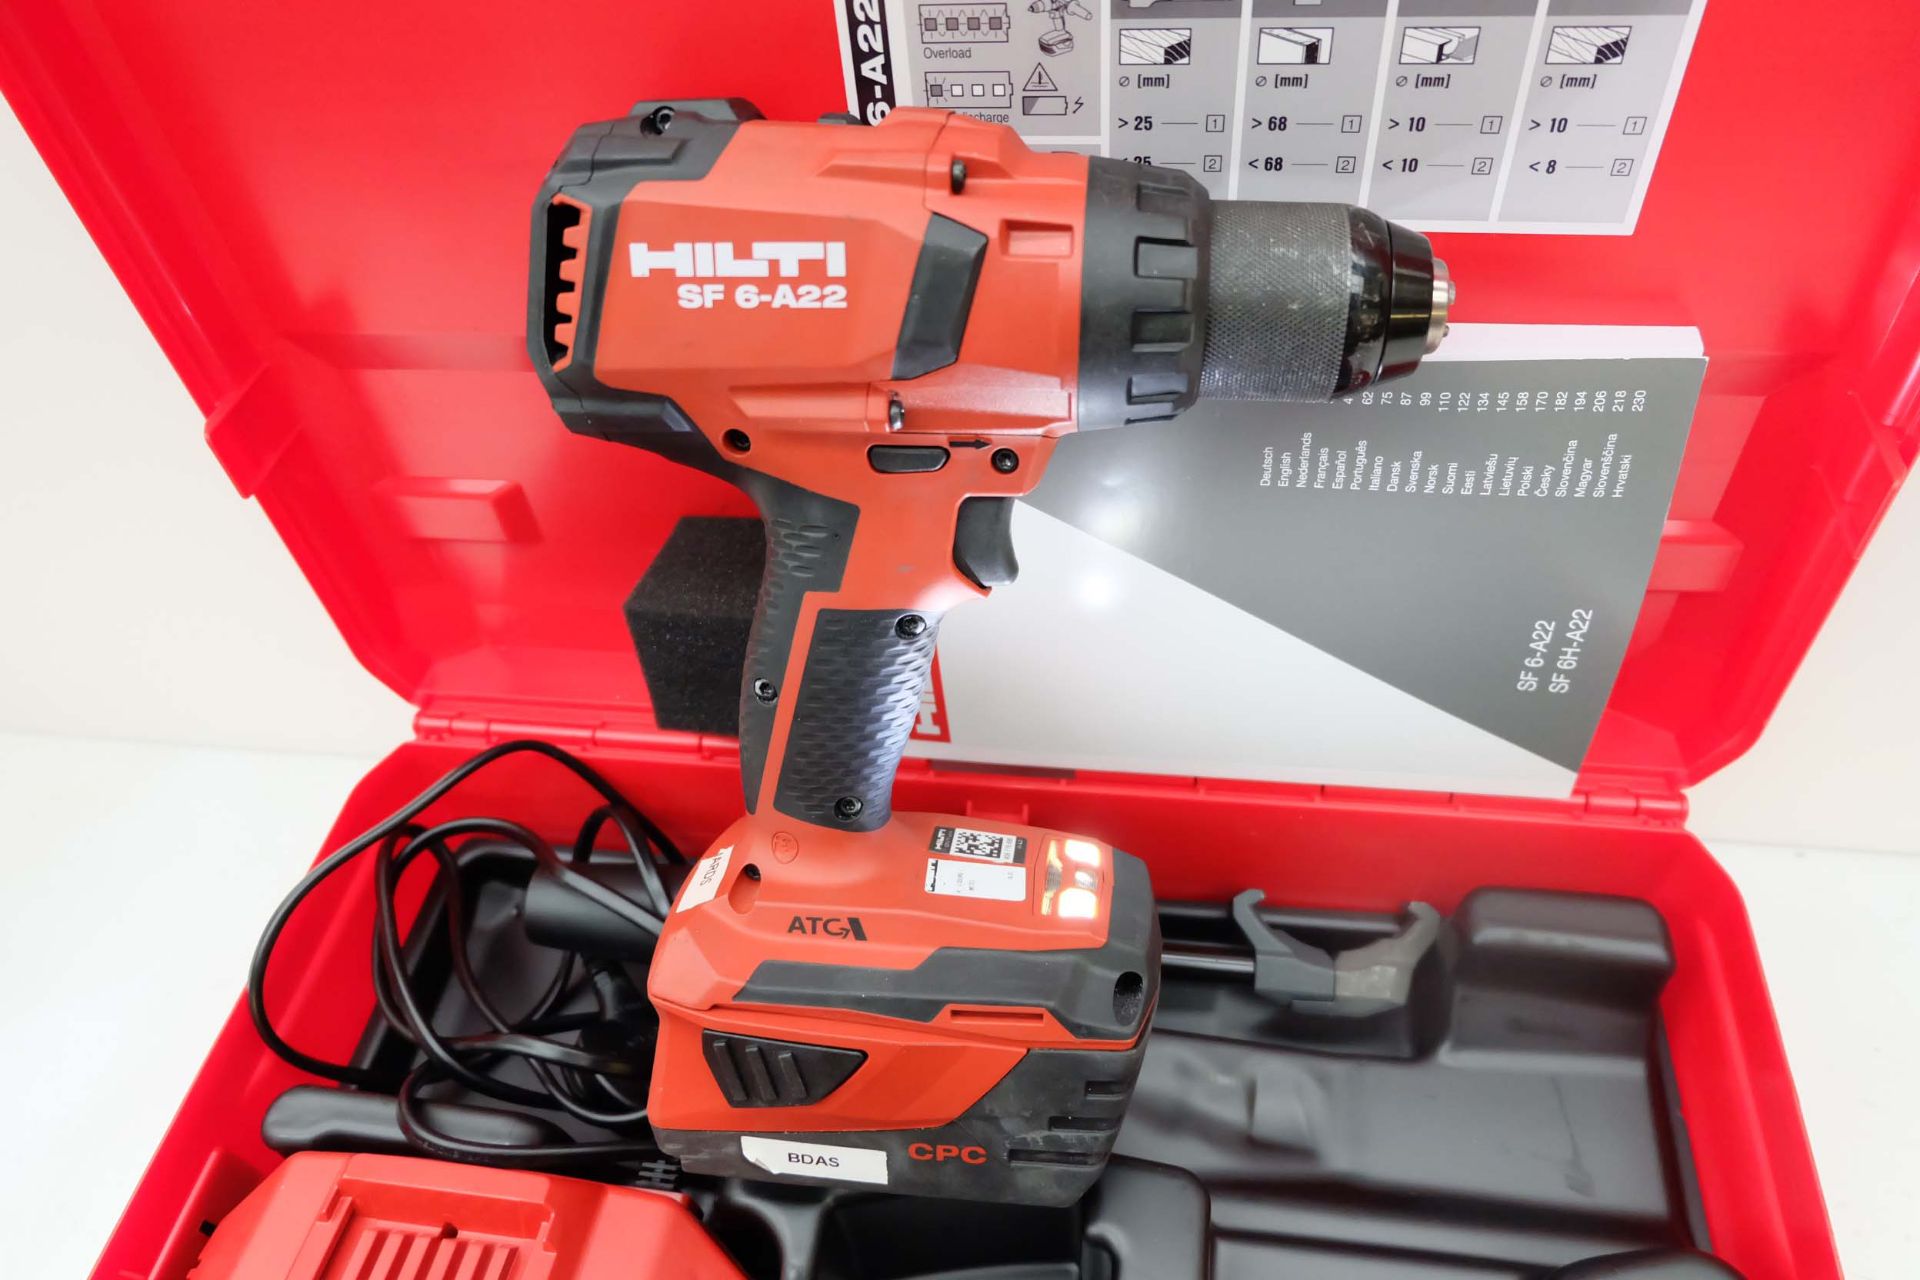 Hilti Model SF 6-A22 Cordless Power Drill. 2 x 22V 5.2Ah Batteries. 240V Charger. - Image 5 of 9